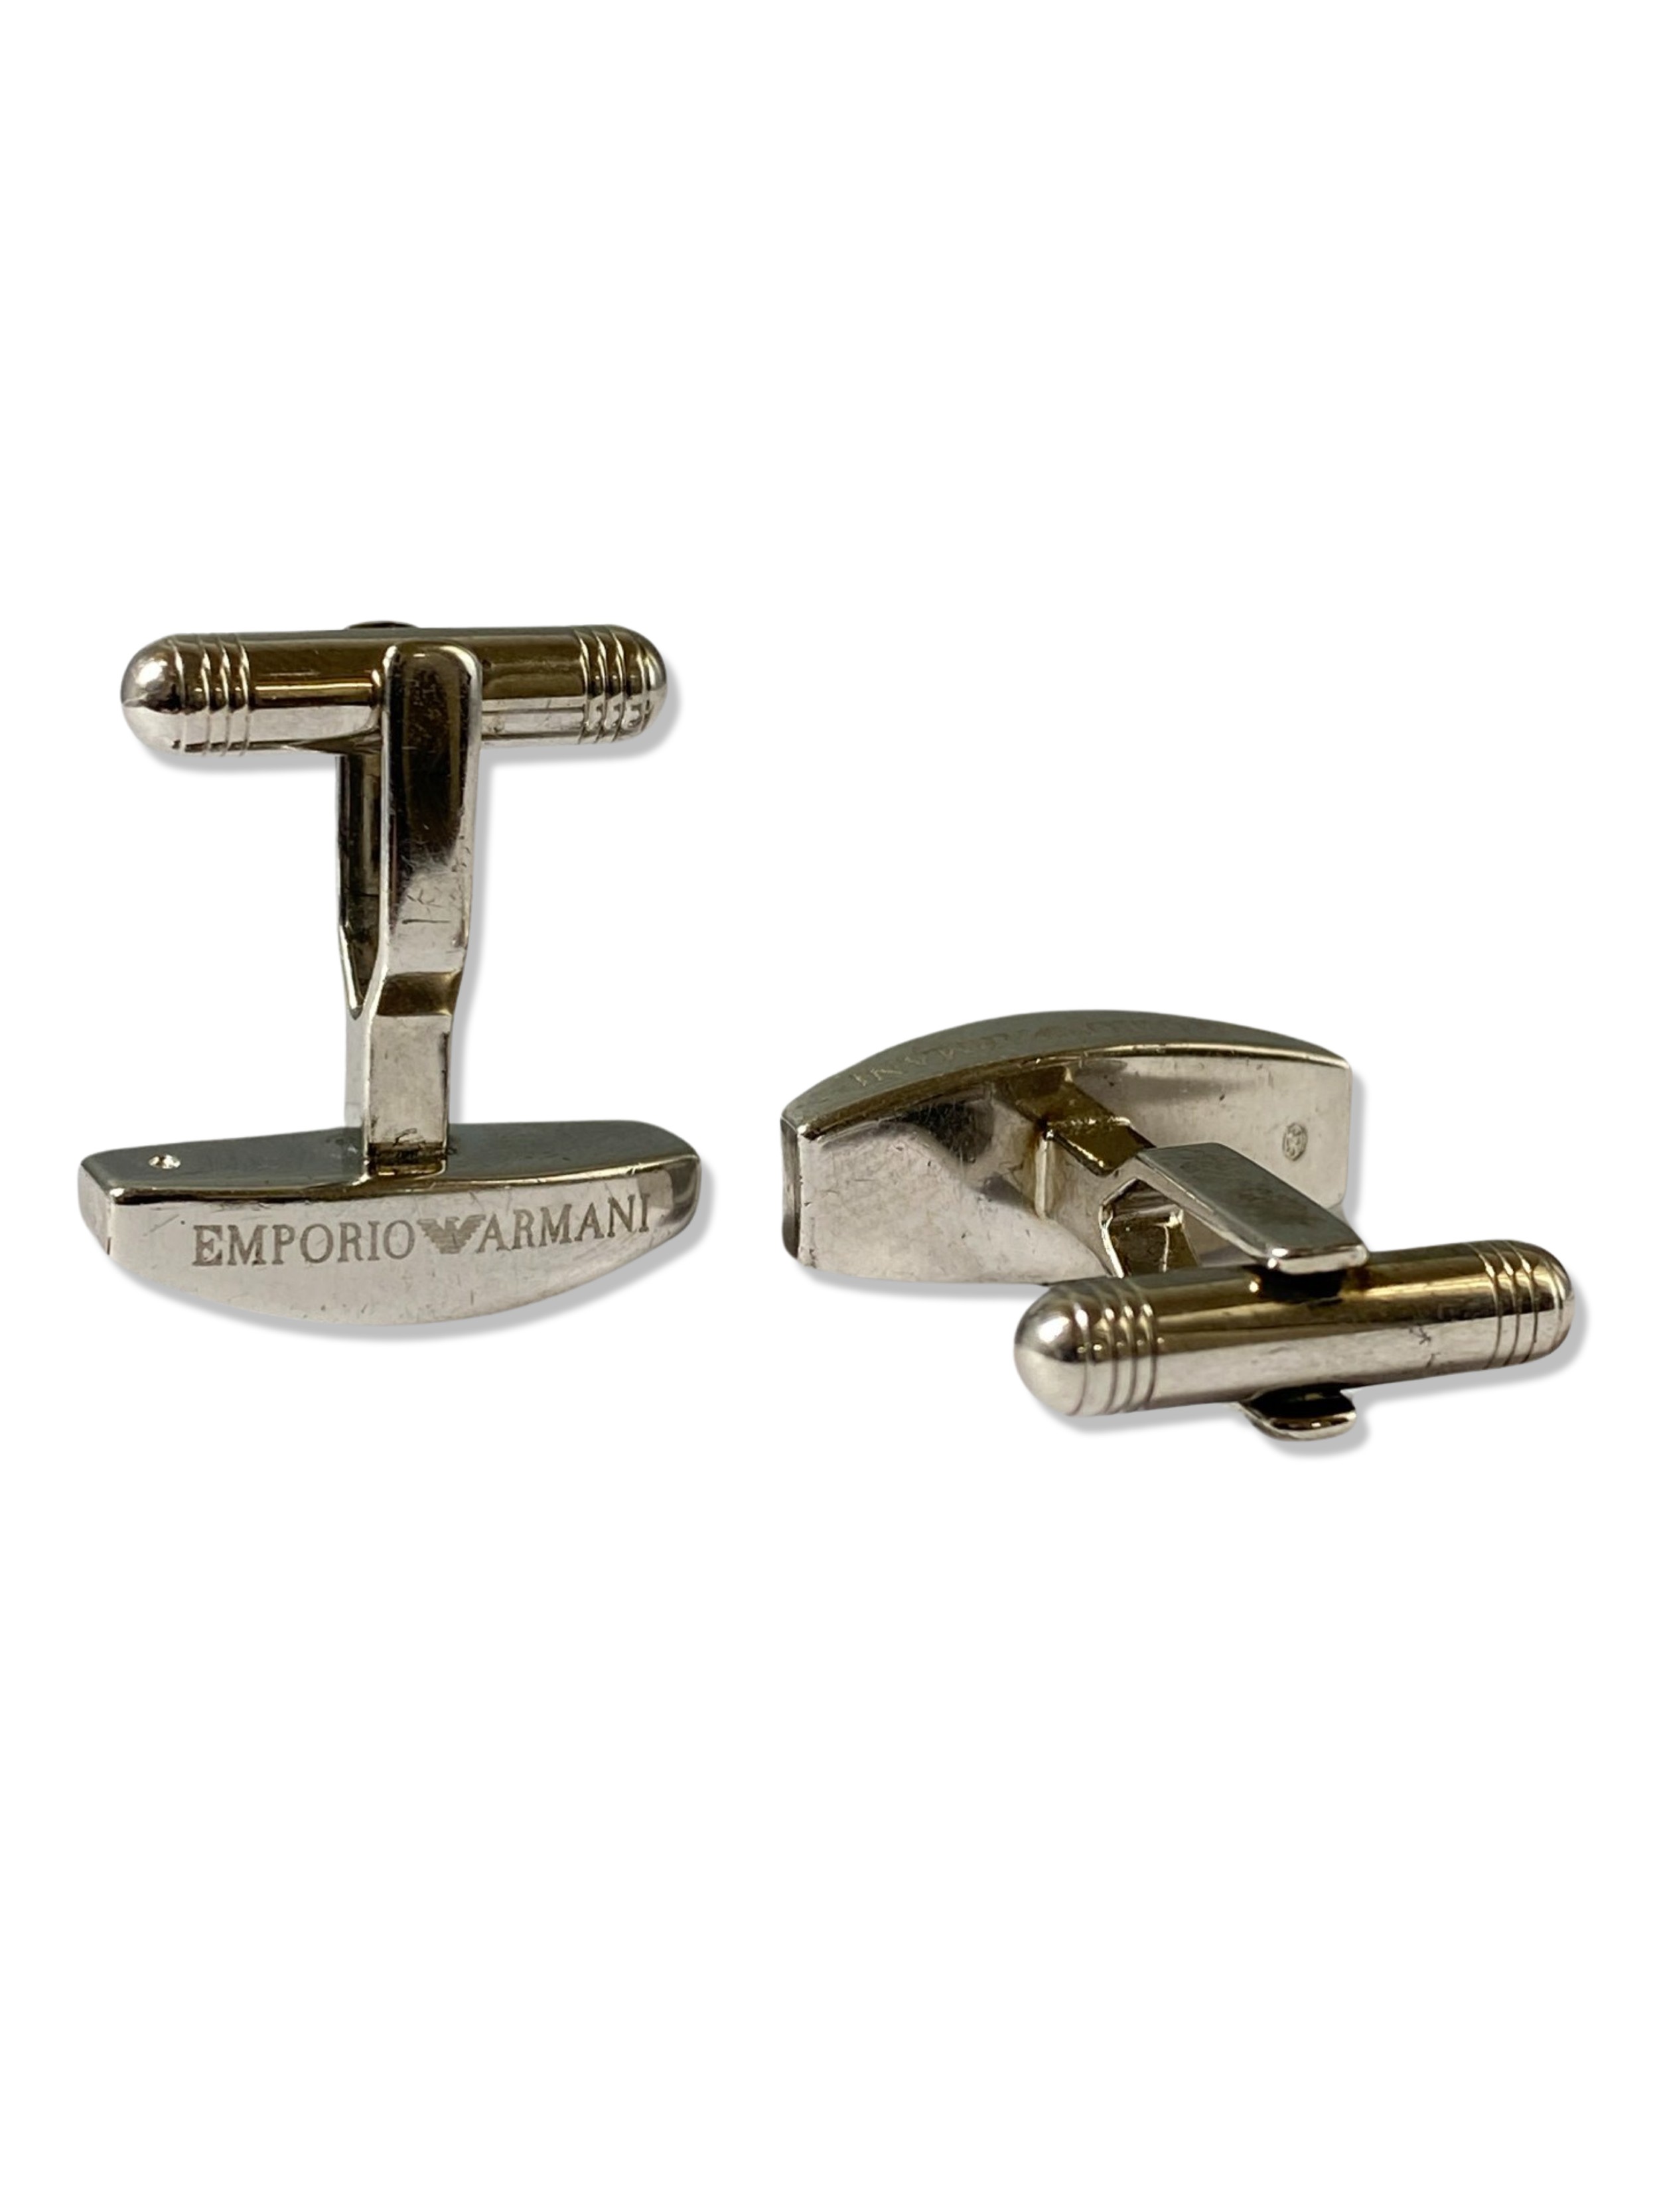 Pair of Emporio Armani Silver Cufflinks weighing 17.20 grams - Image 2 of 2